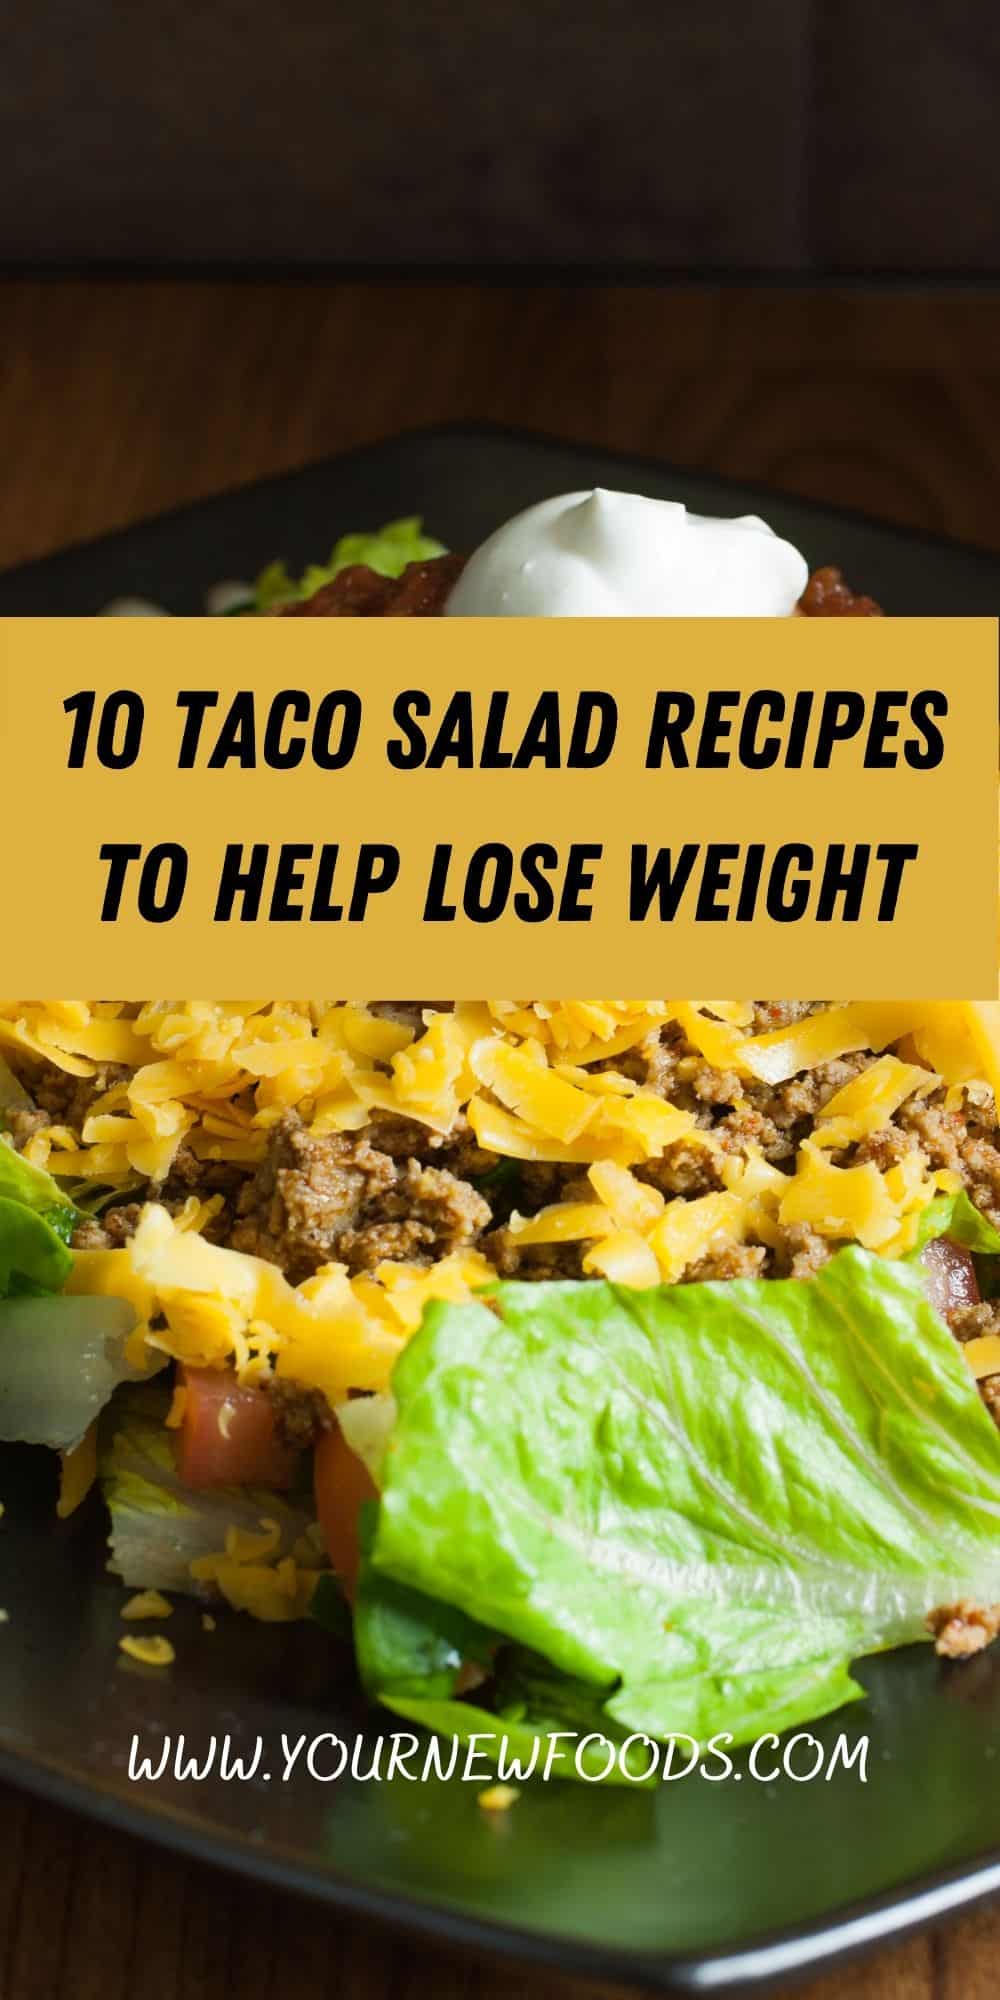 Taco Salad Recipes to Help Lose Weight with a taco salad and a black background